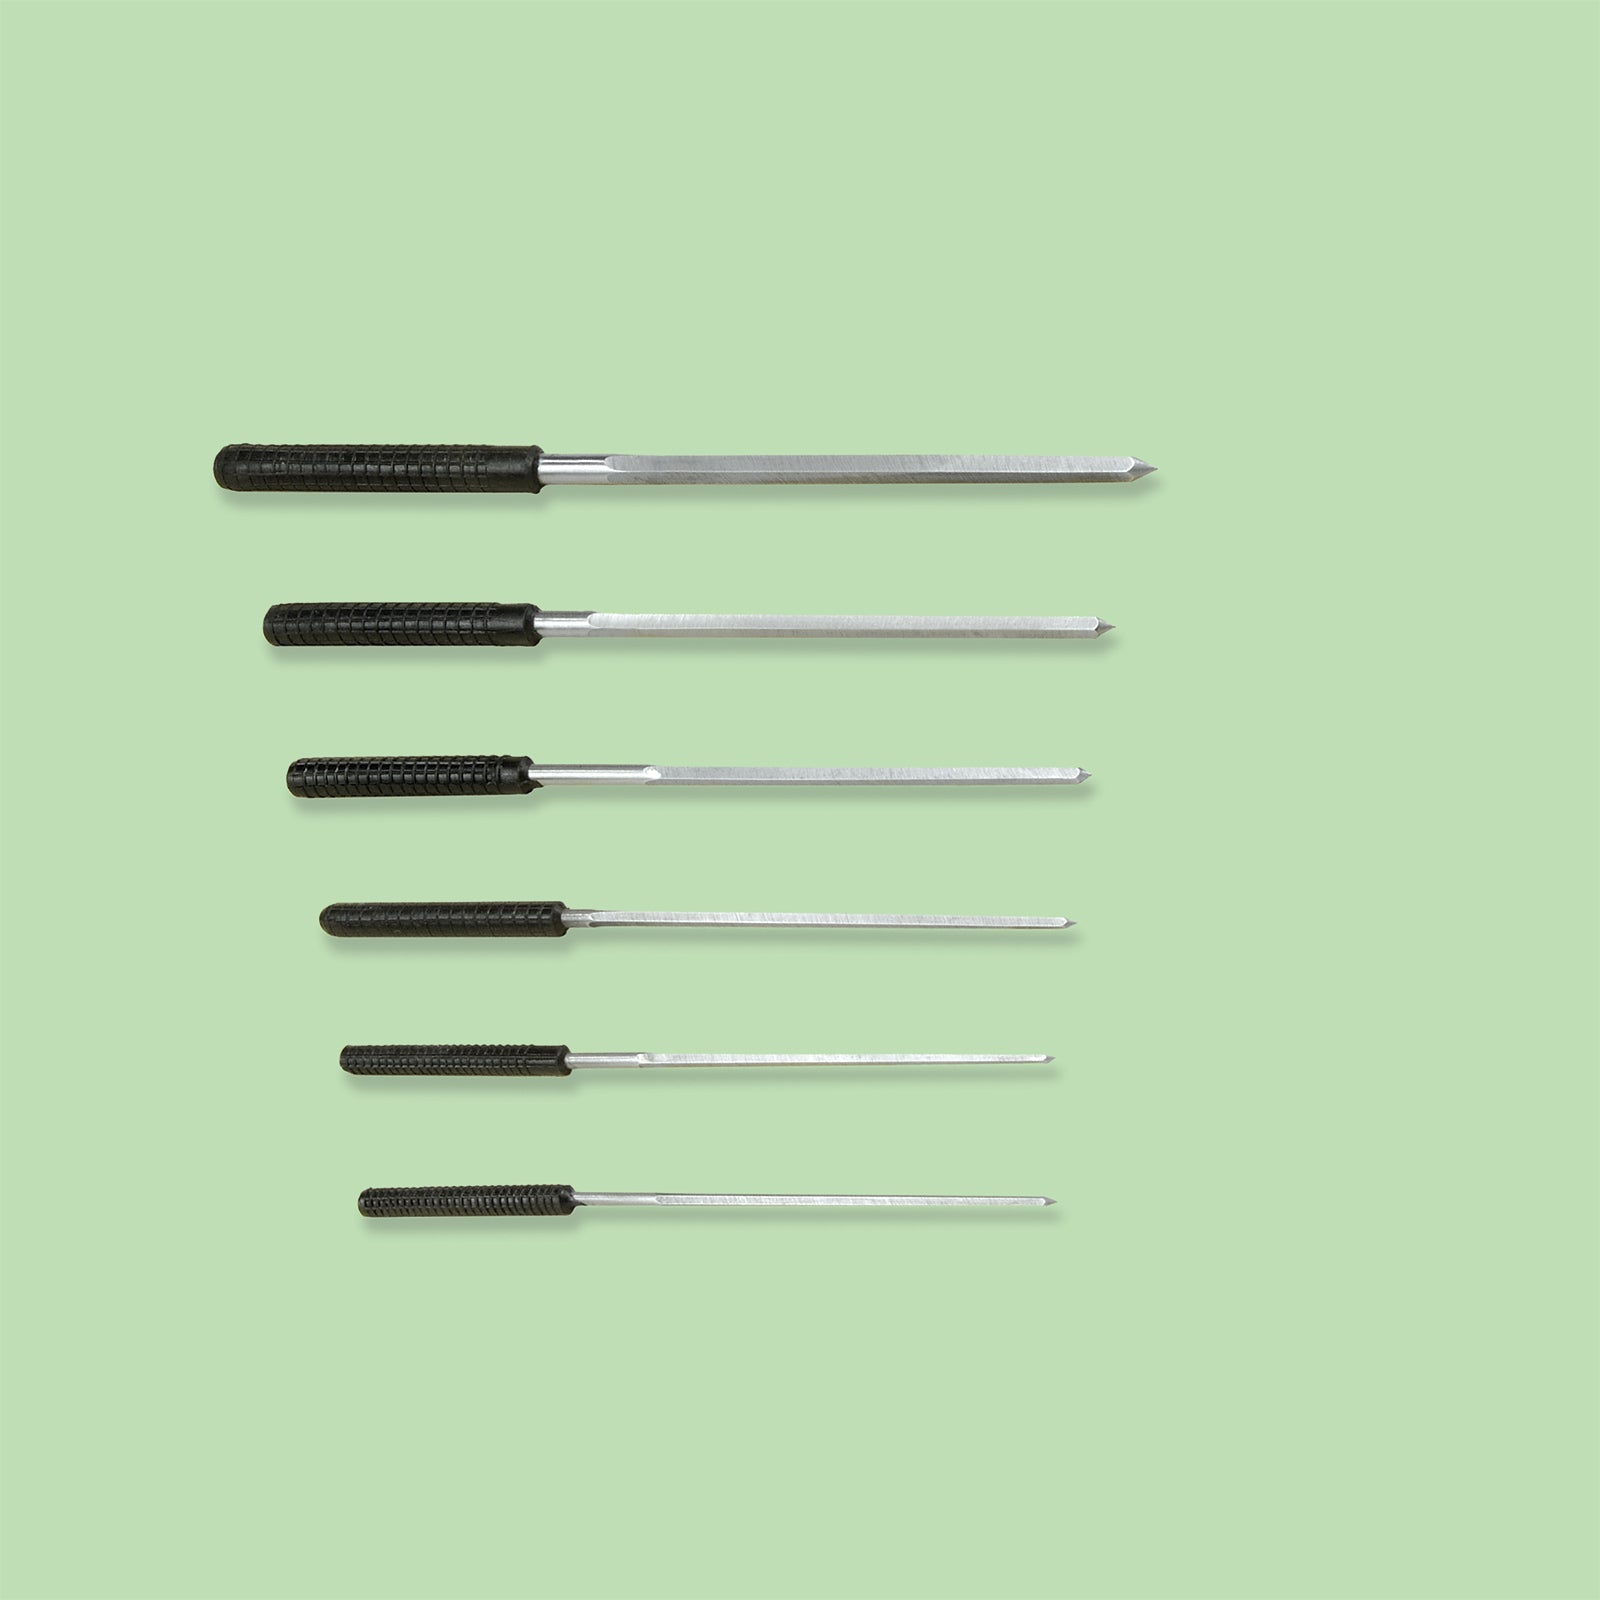 Micro - Size Precision Reamers (Set of 6)